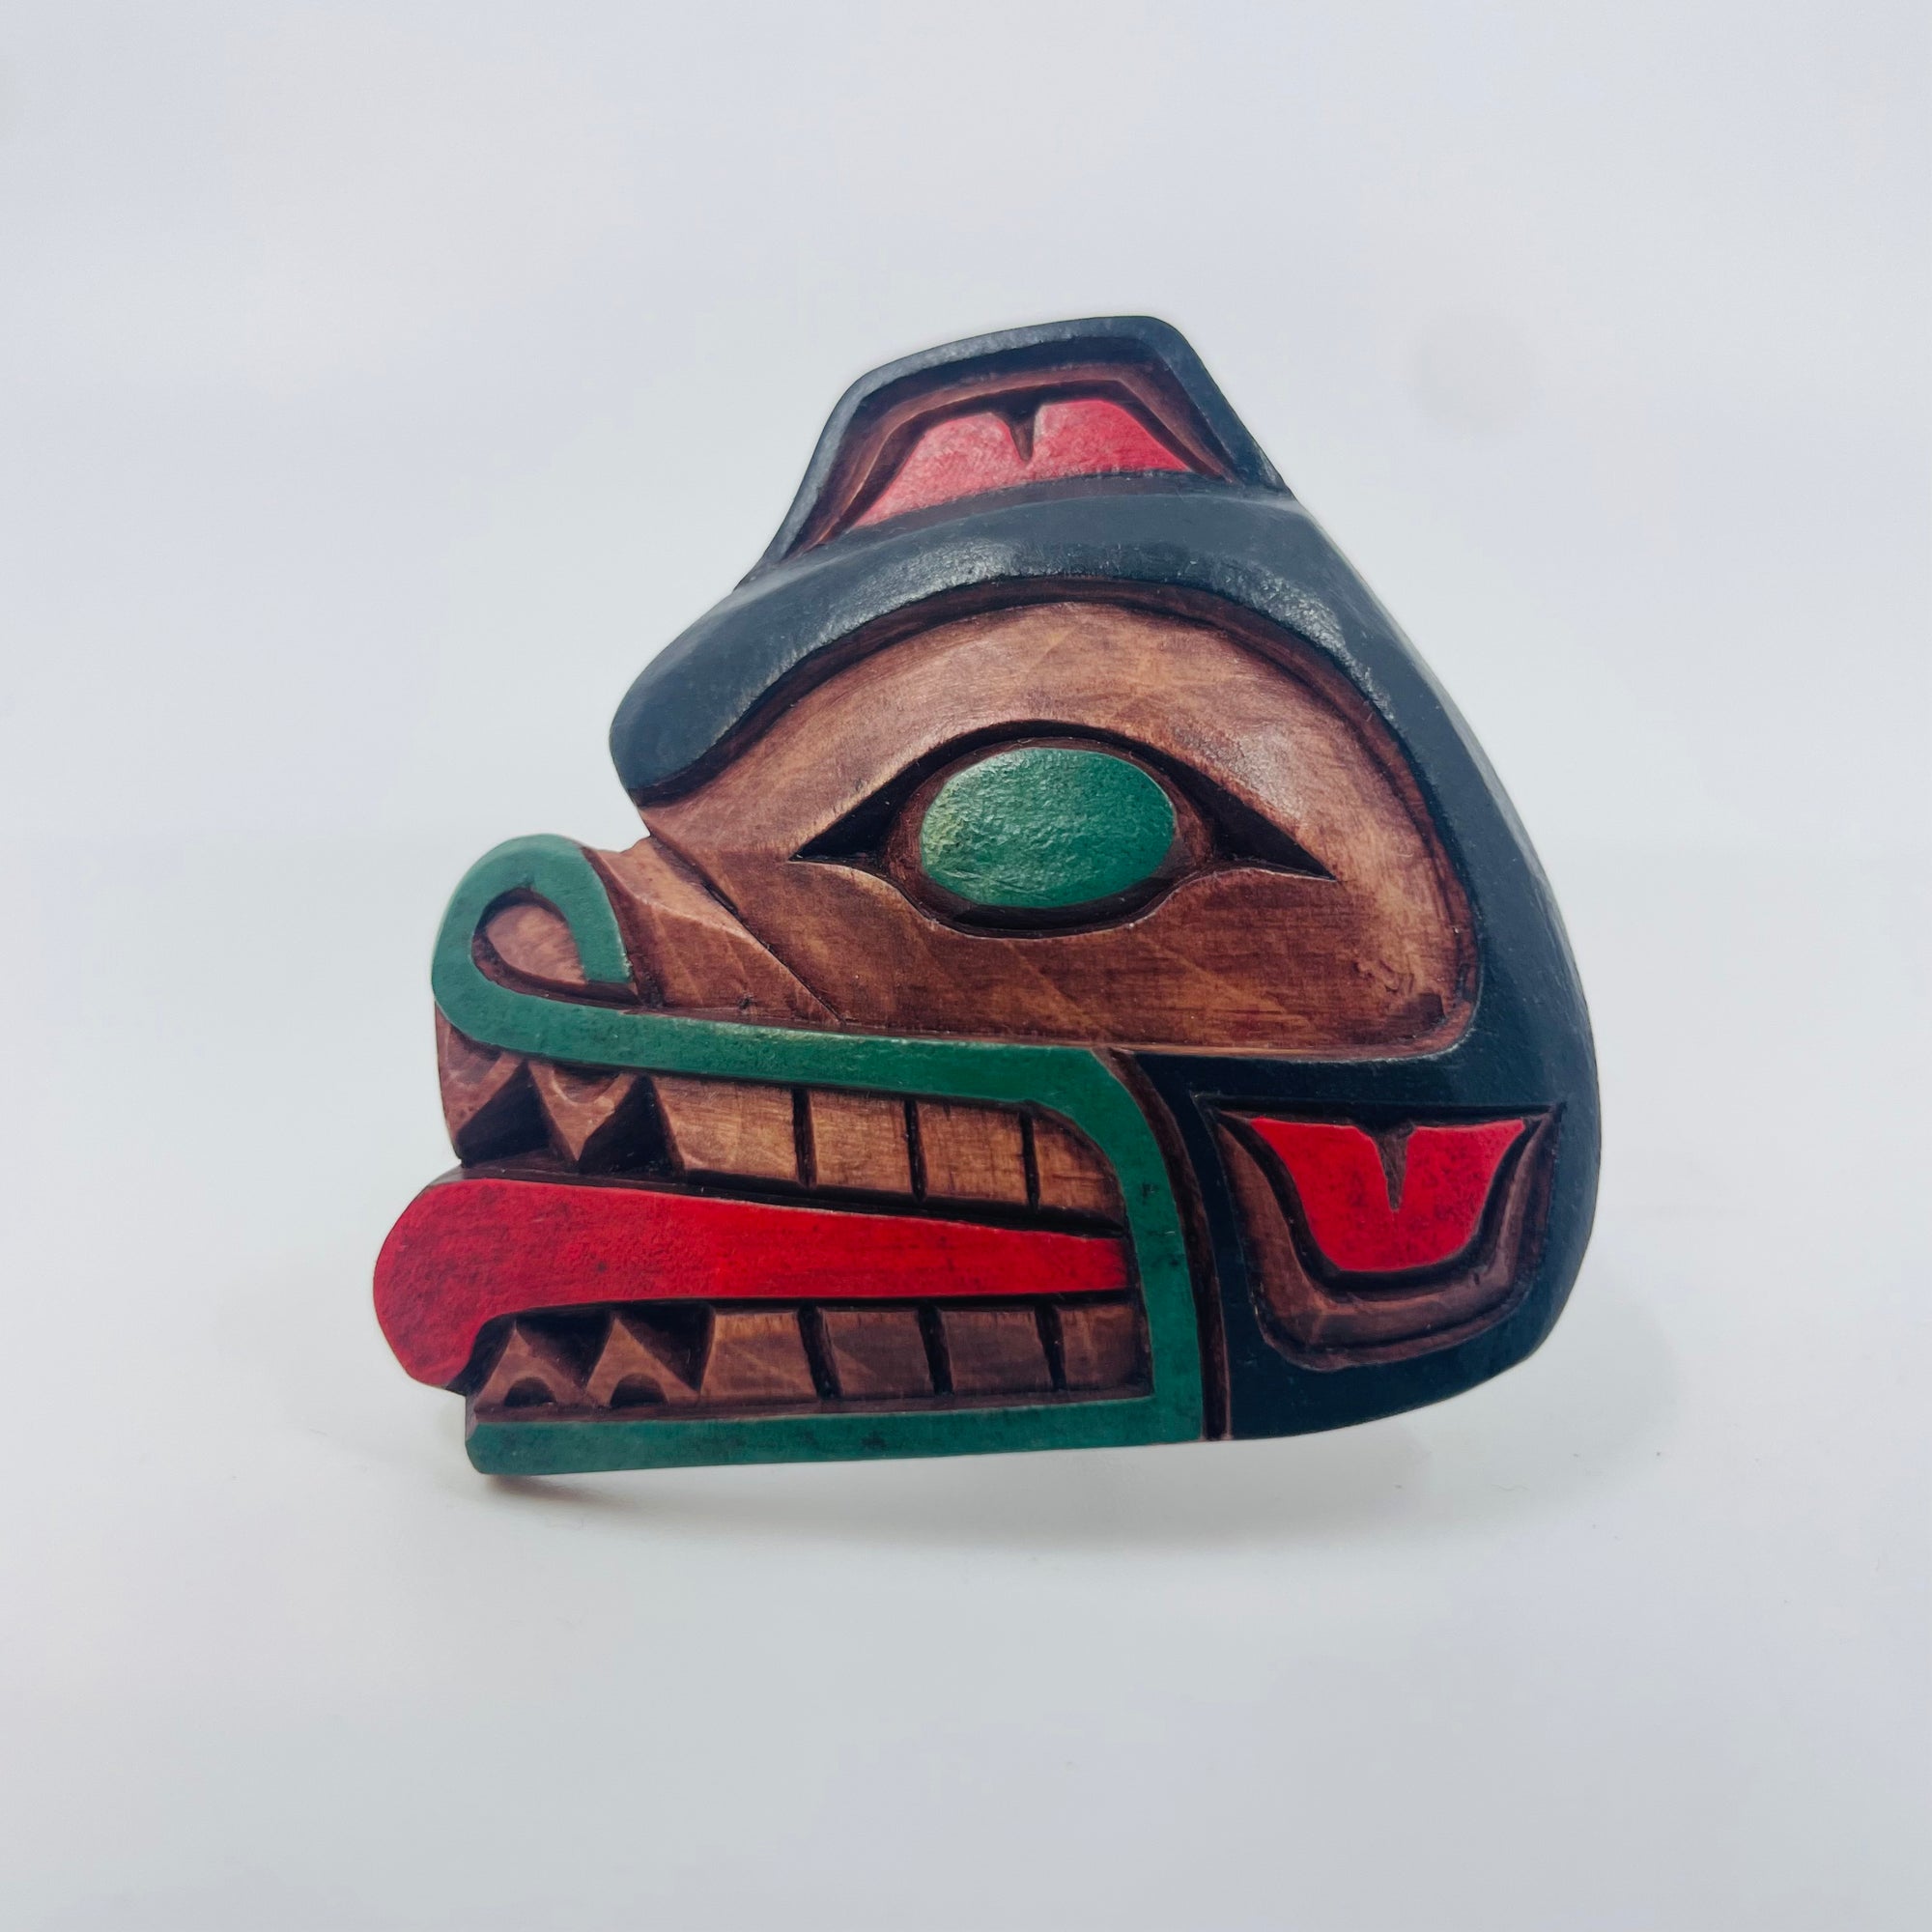 Artie George Magnets - Bear v2 - WM-Magnets-30 - House of Himwitsa Native Art Gallery and Gifts